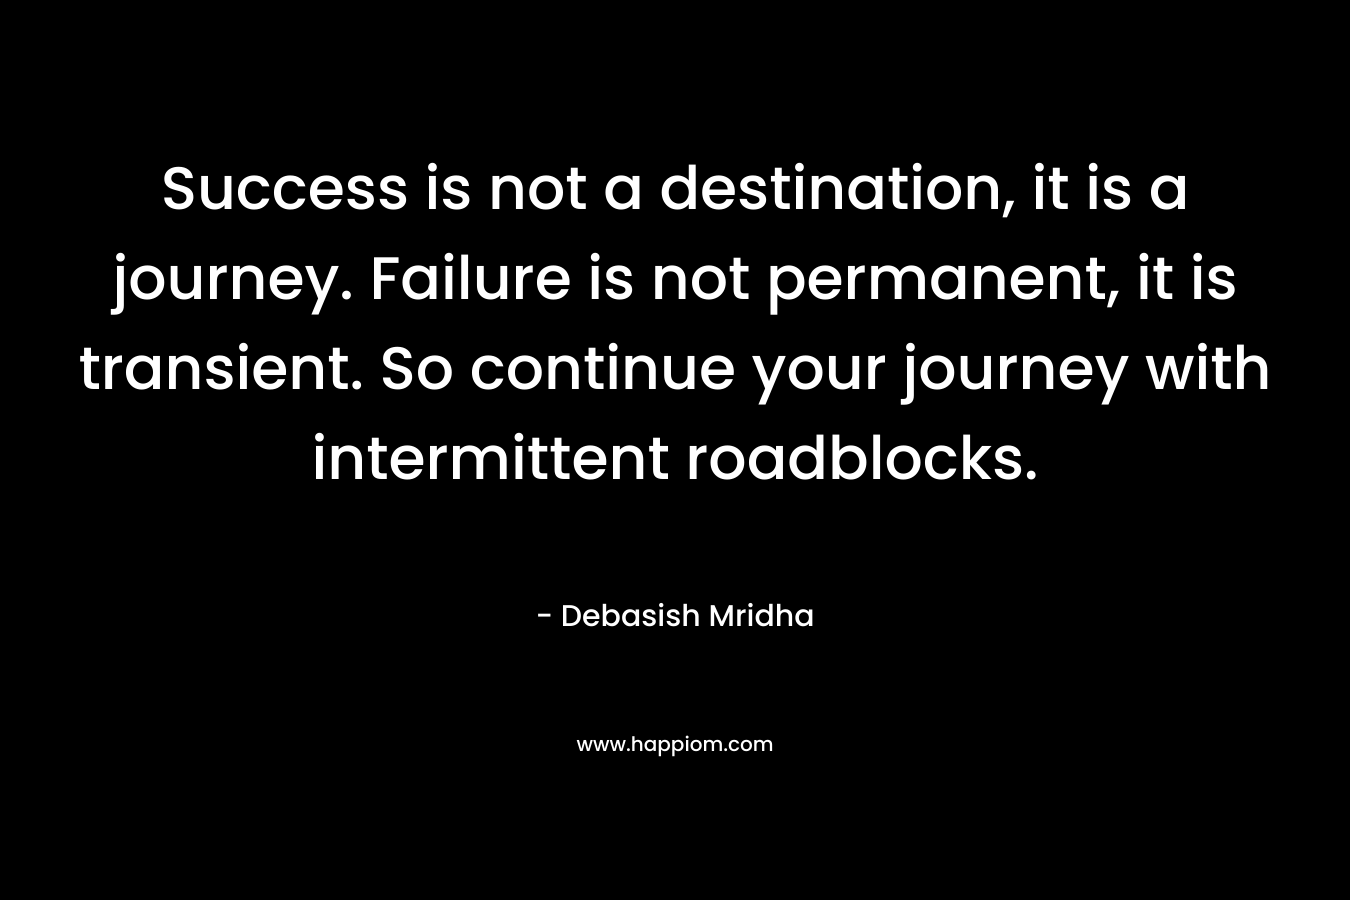 Success is not a destination, it is a journey. Failure is not permanent, it is transient. So continue your journey with intermittent roadblocks.